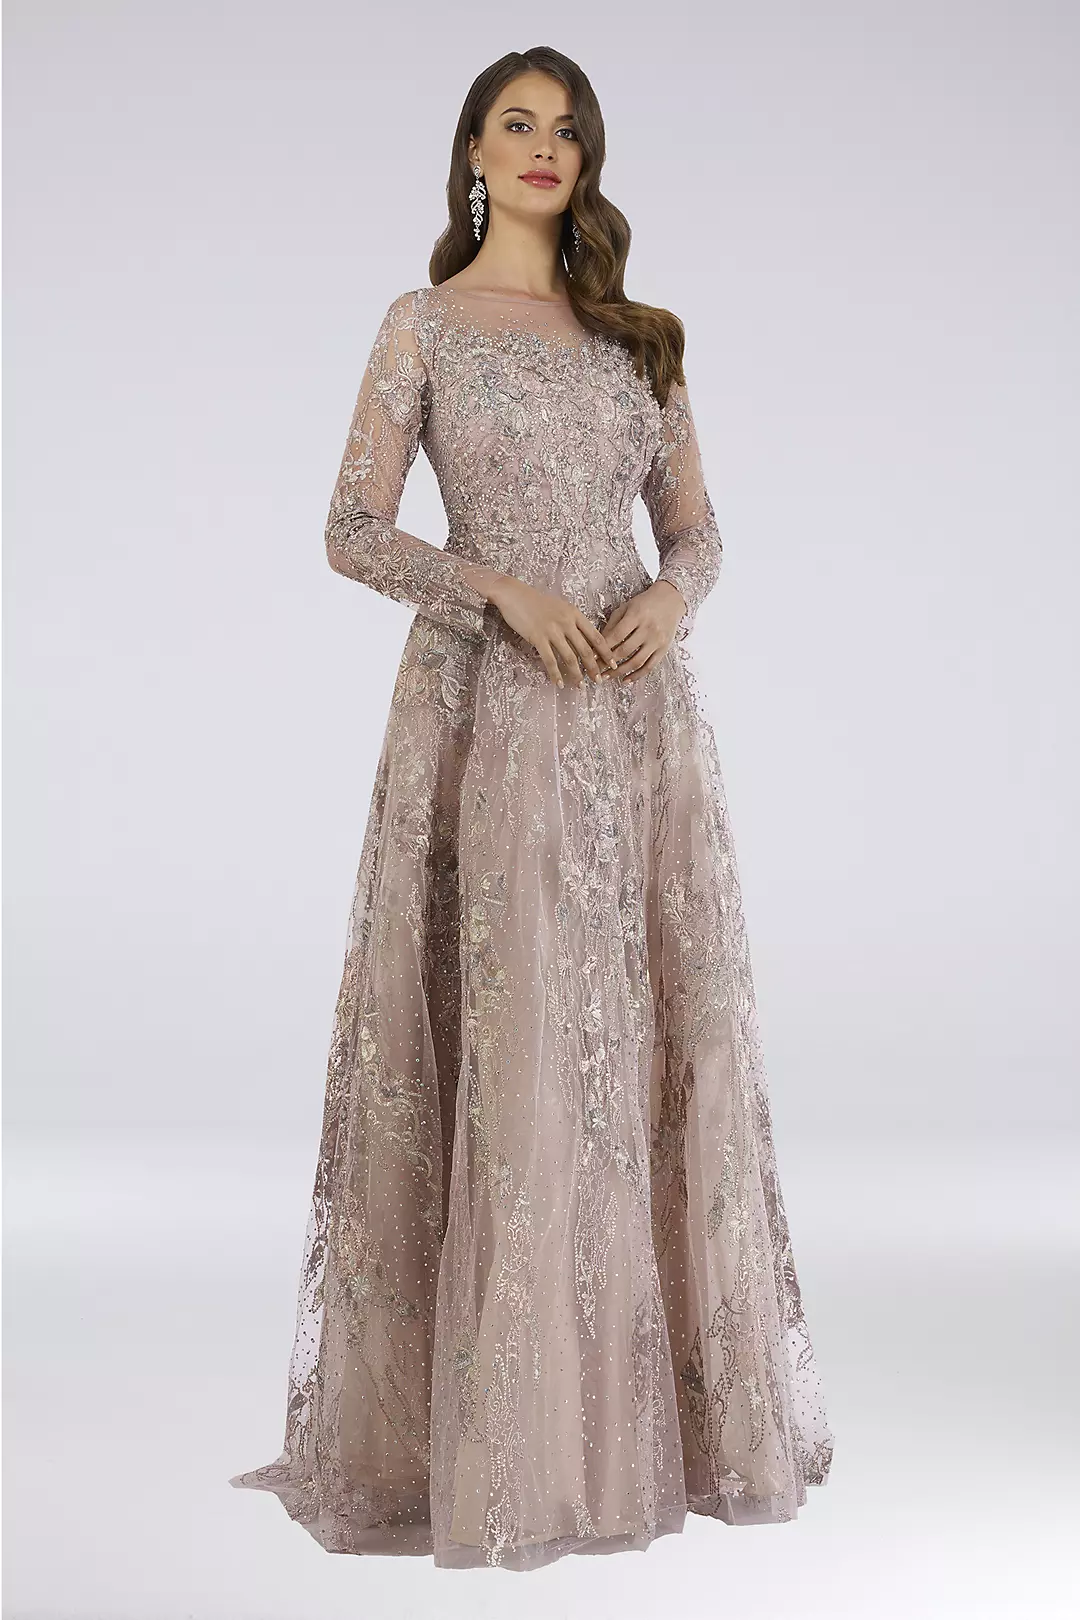 Illusion Long-Sleeve Embroidered Applique Gown Image